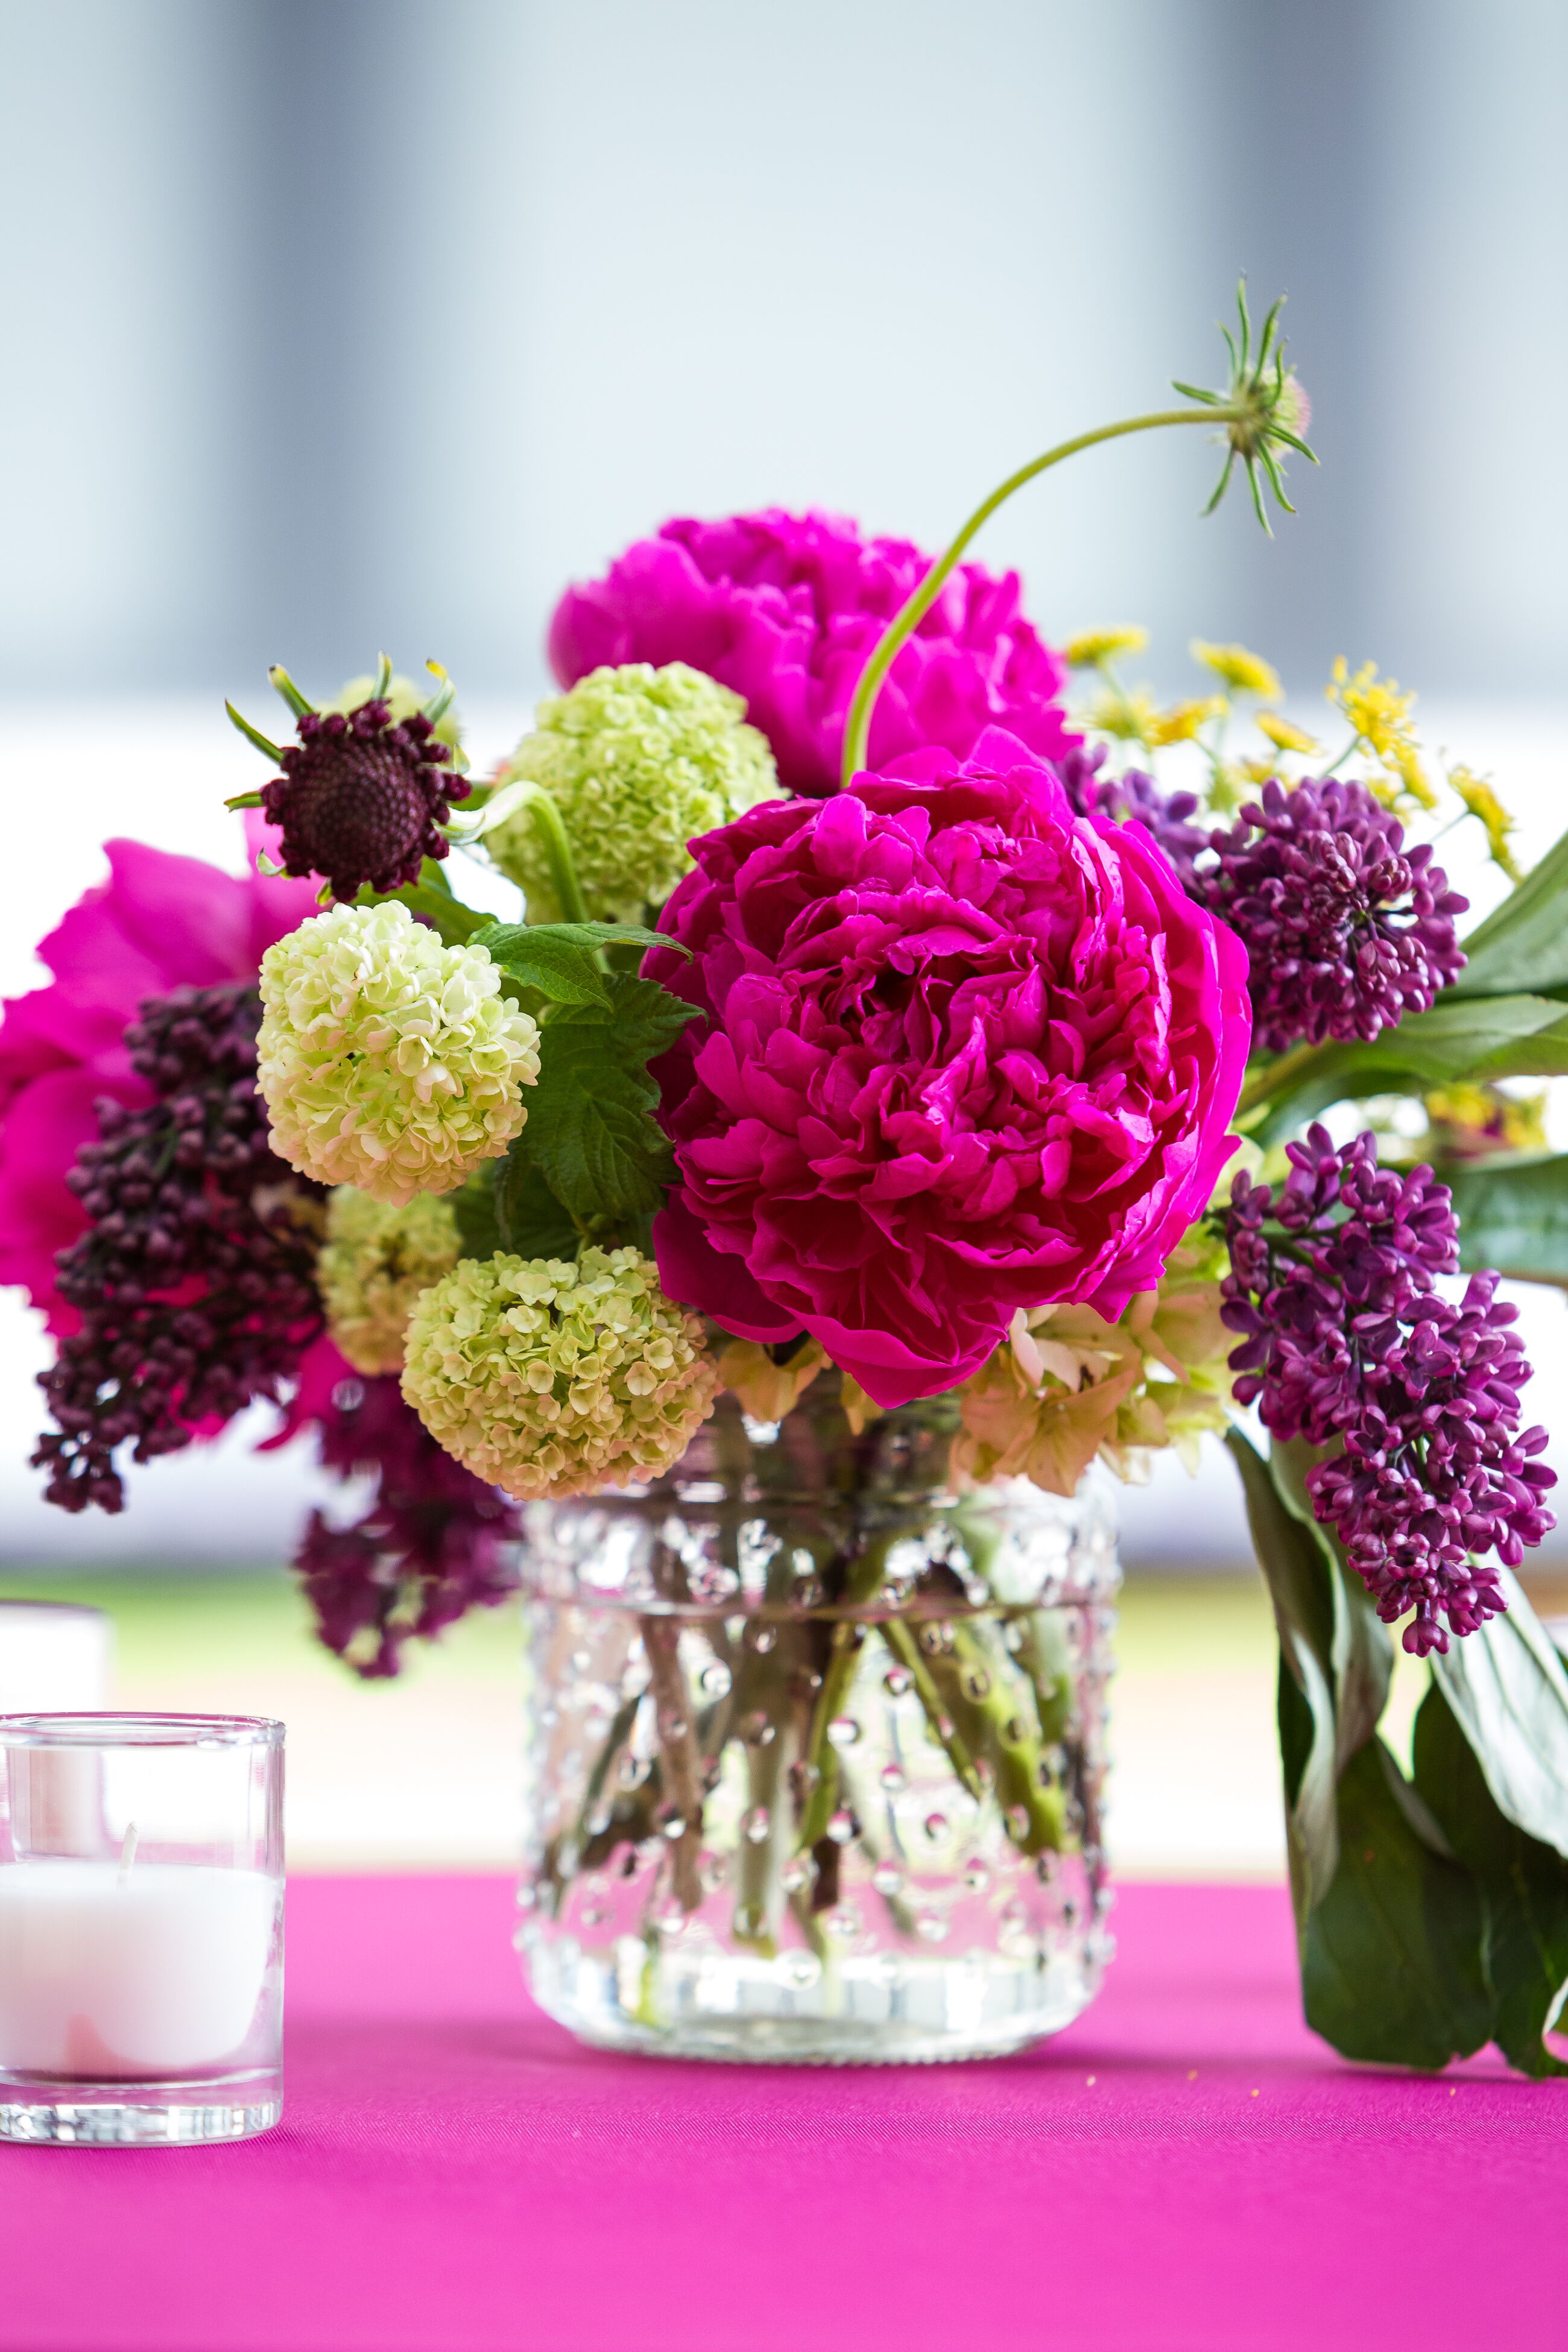 A Hobnail Vase Centerpiece with Pink Peonies and Hydrangeas